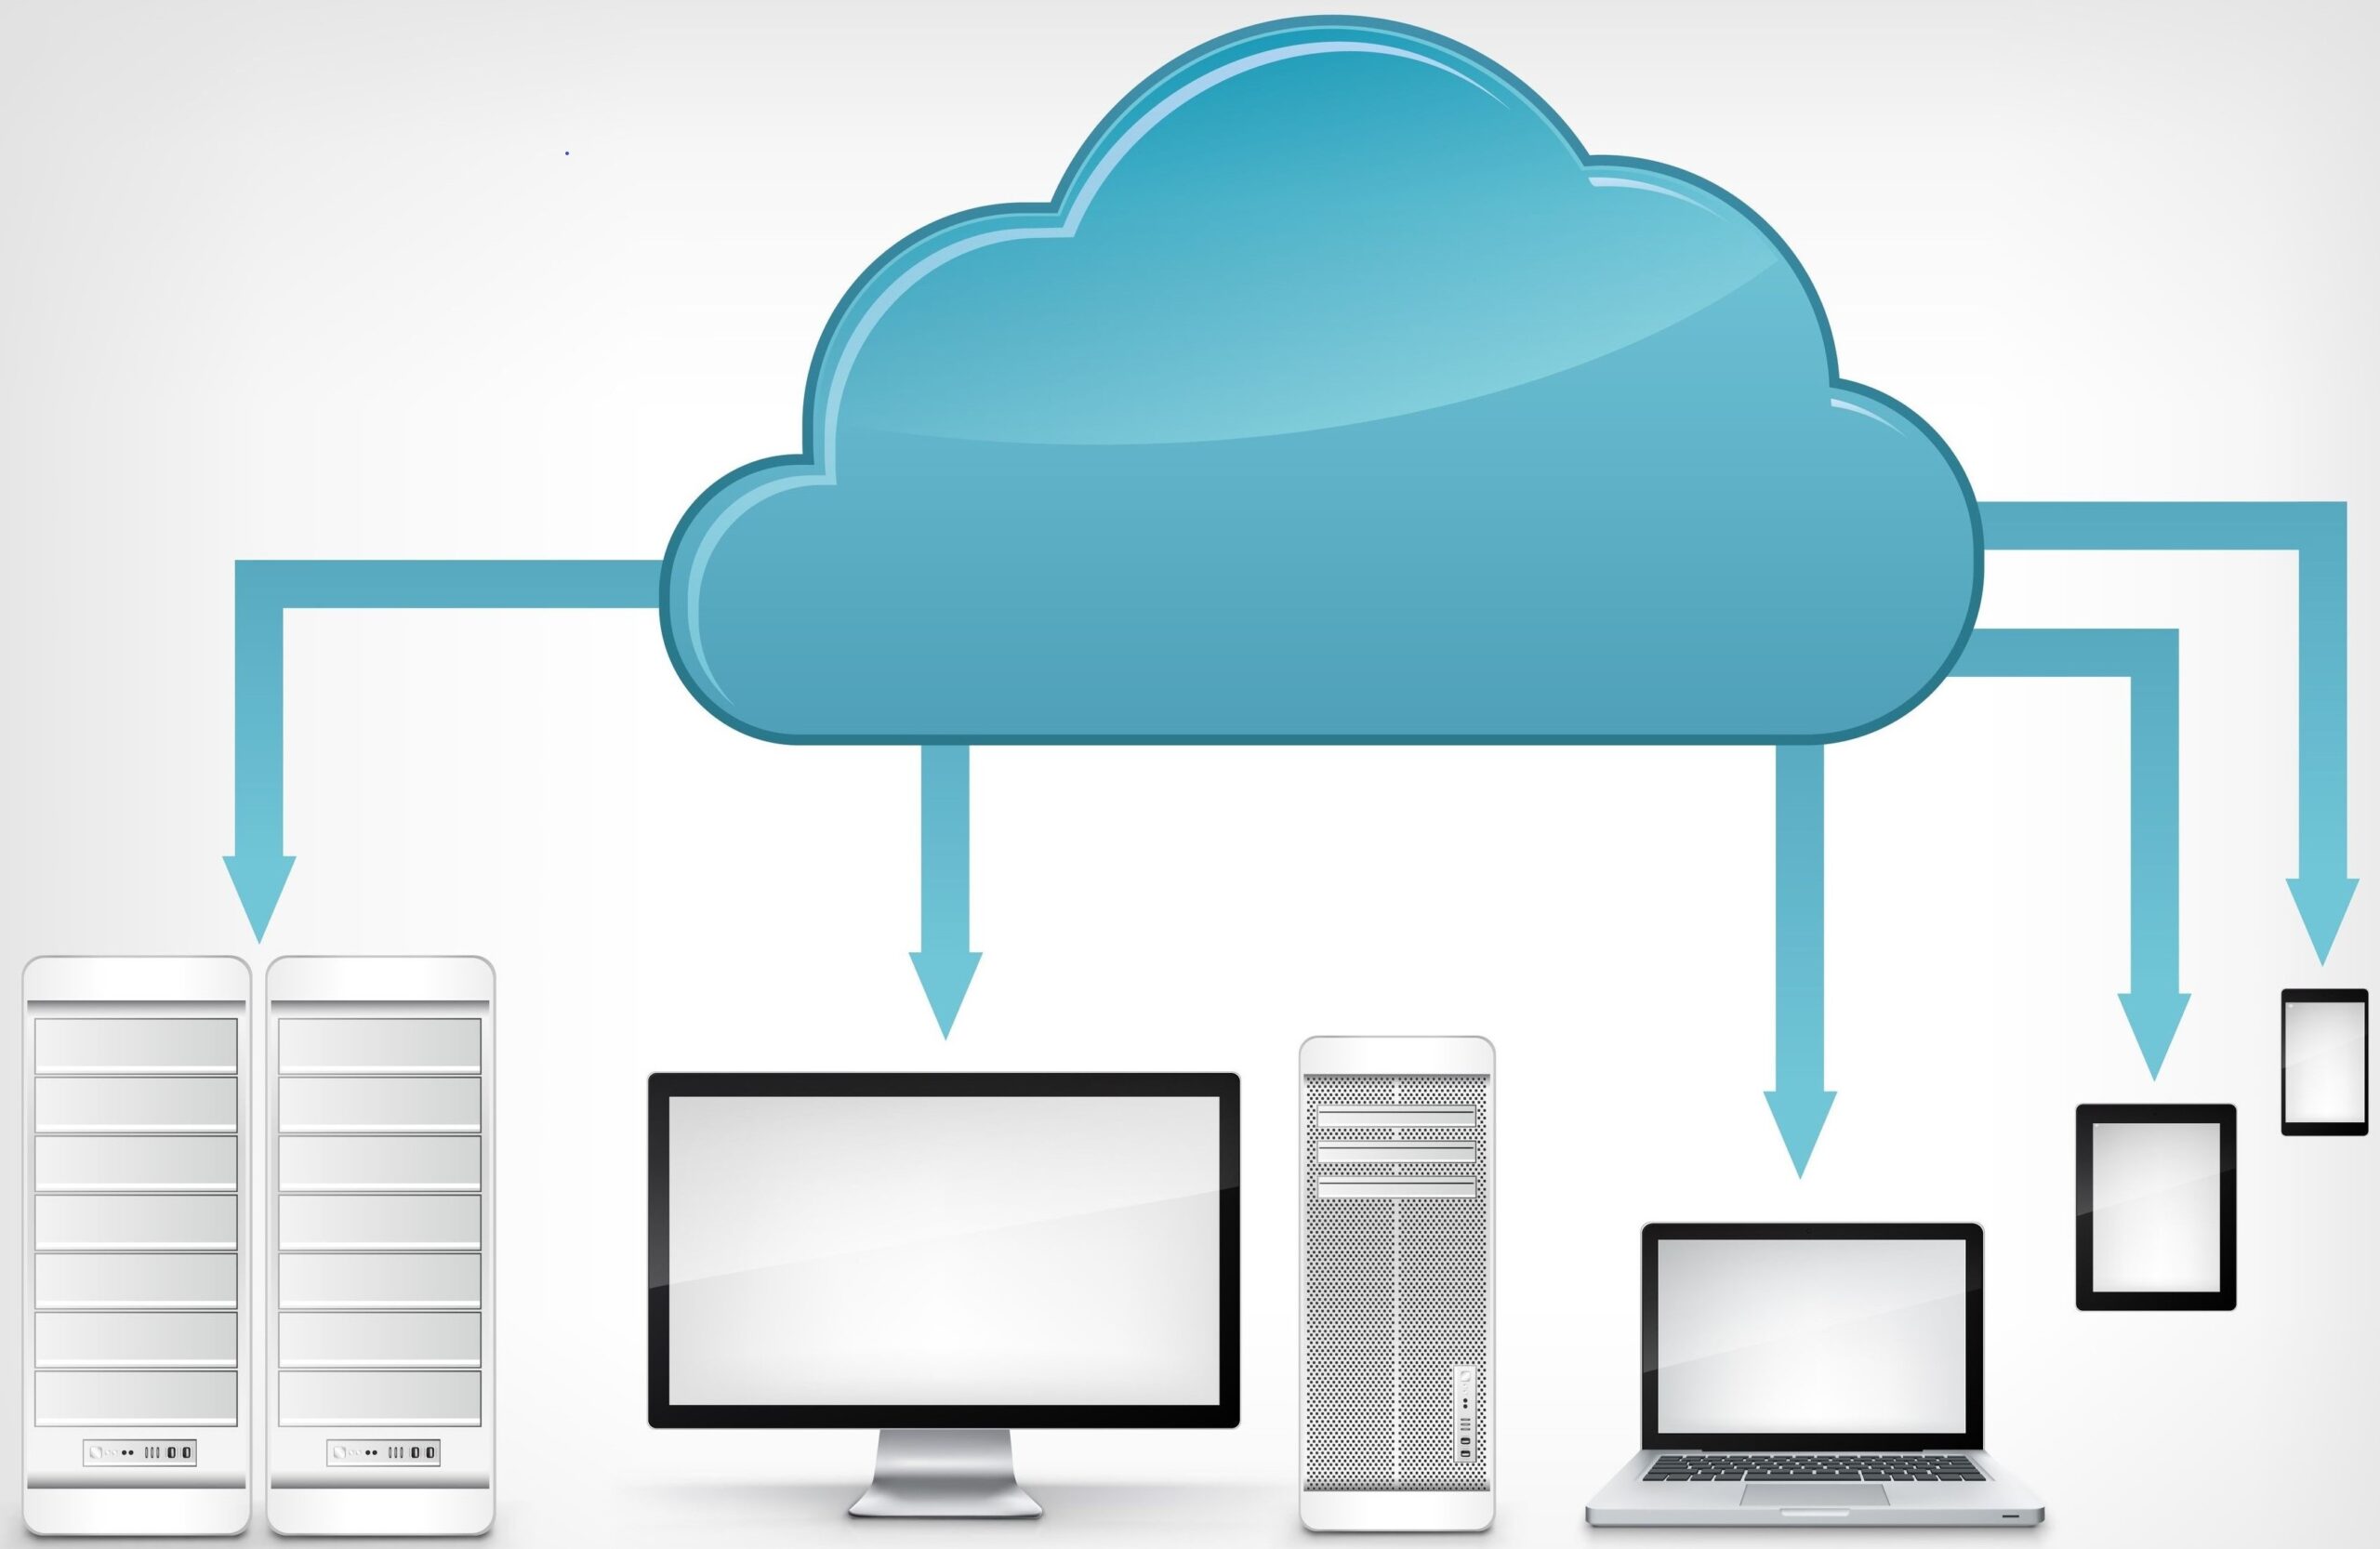 ICT Tip of the Day - Use the Cloud to Backup Important Information